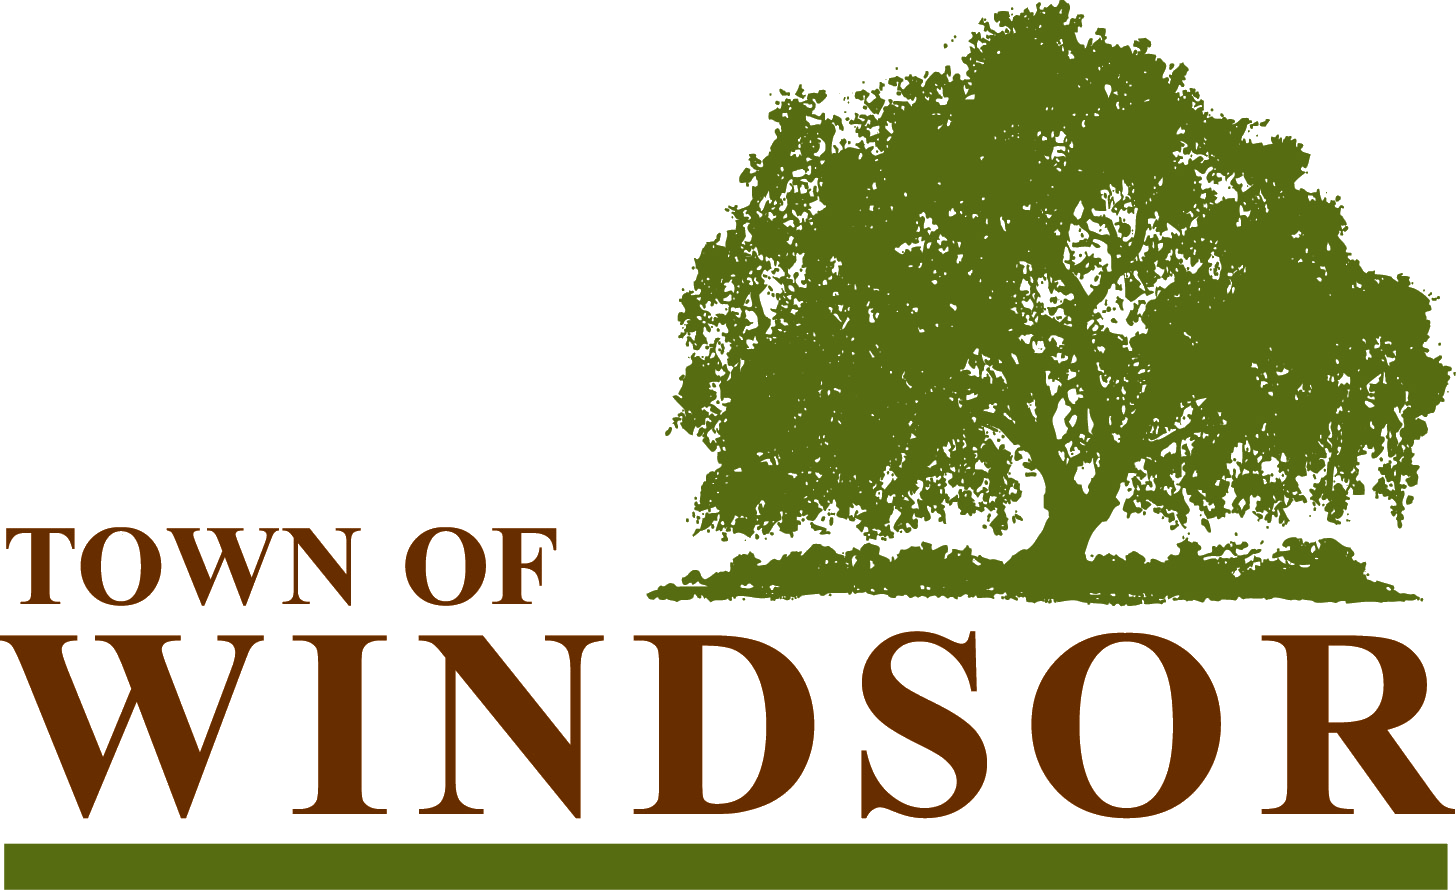 The Town of Windsor Climate Adaptation Plan